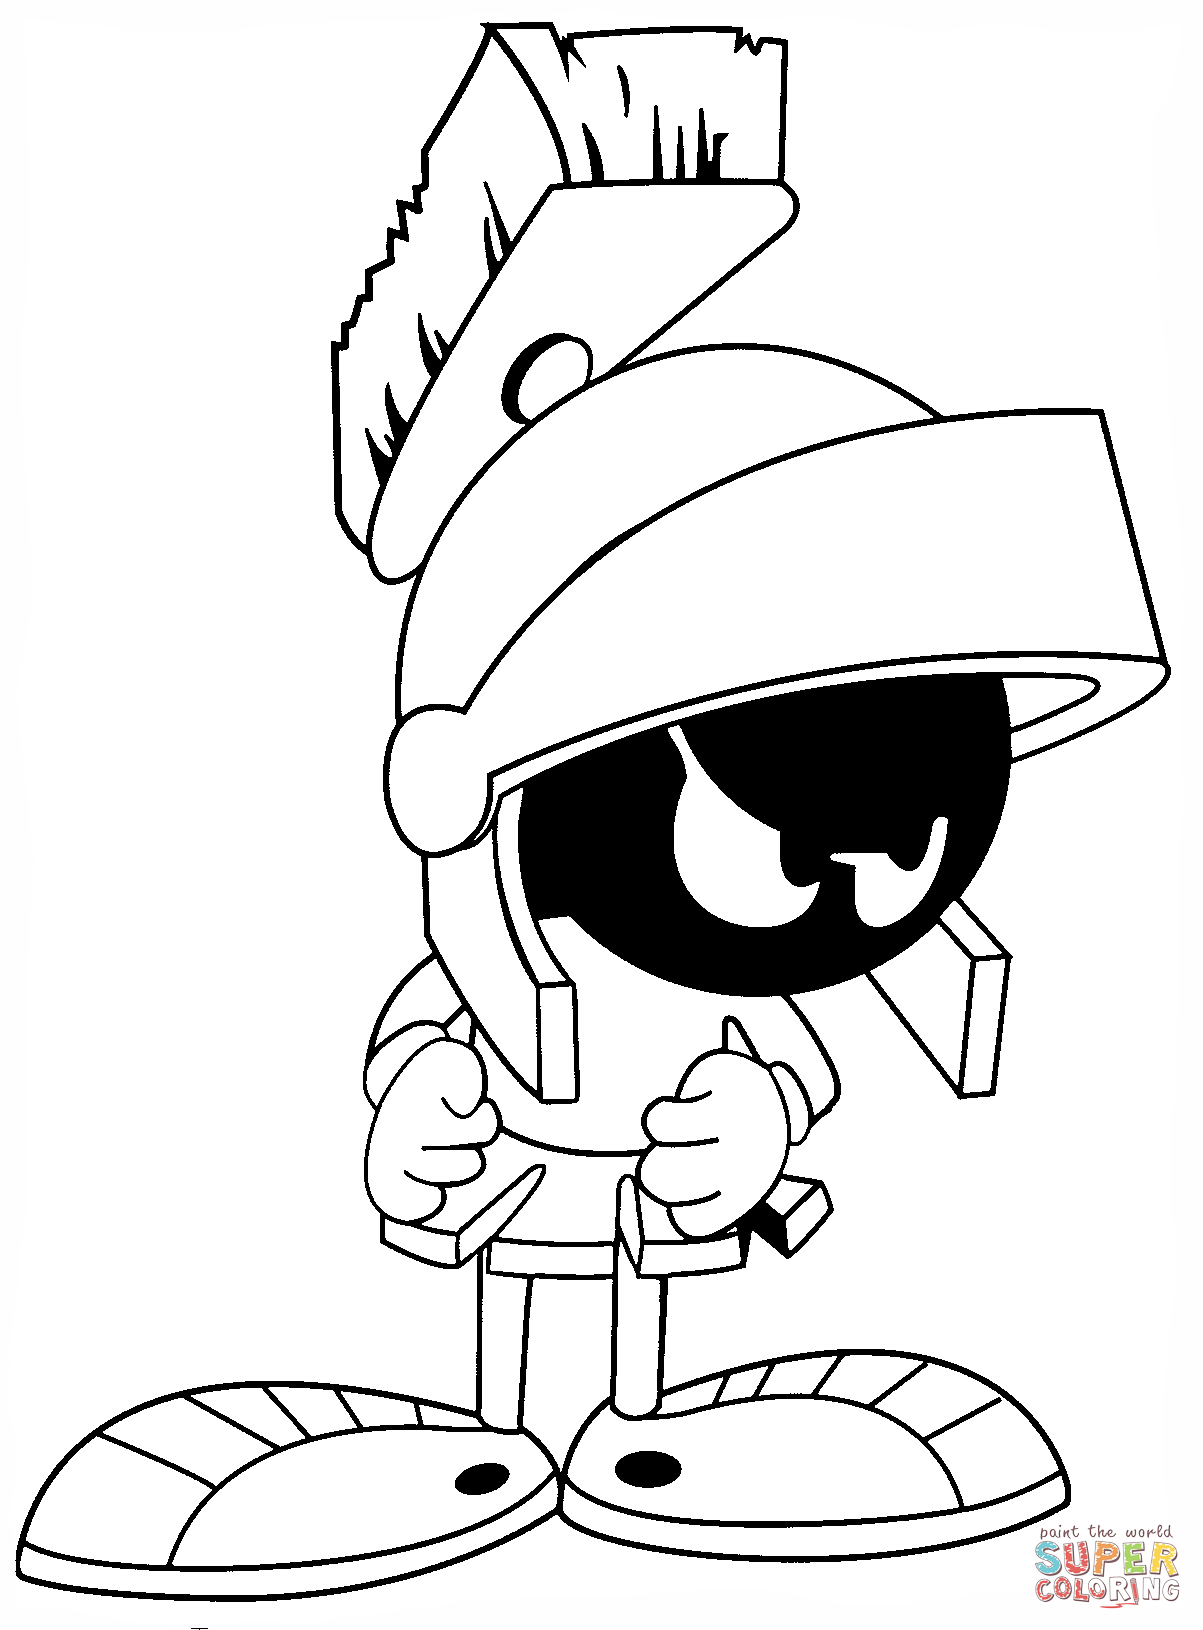 Looney tunes marvin the martian coloring page free printable coloring pages